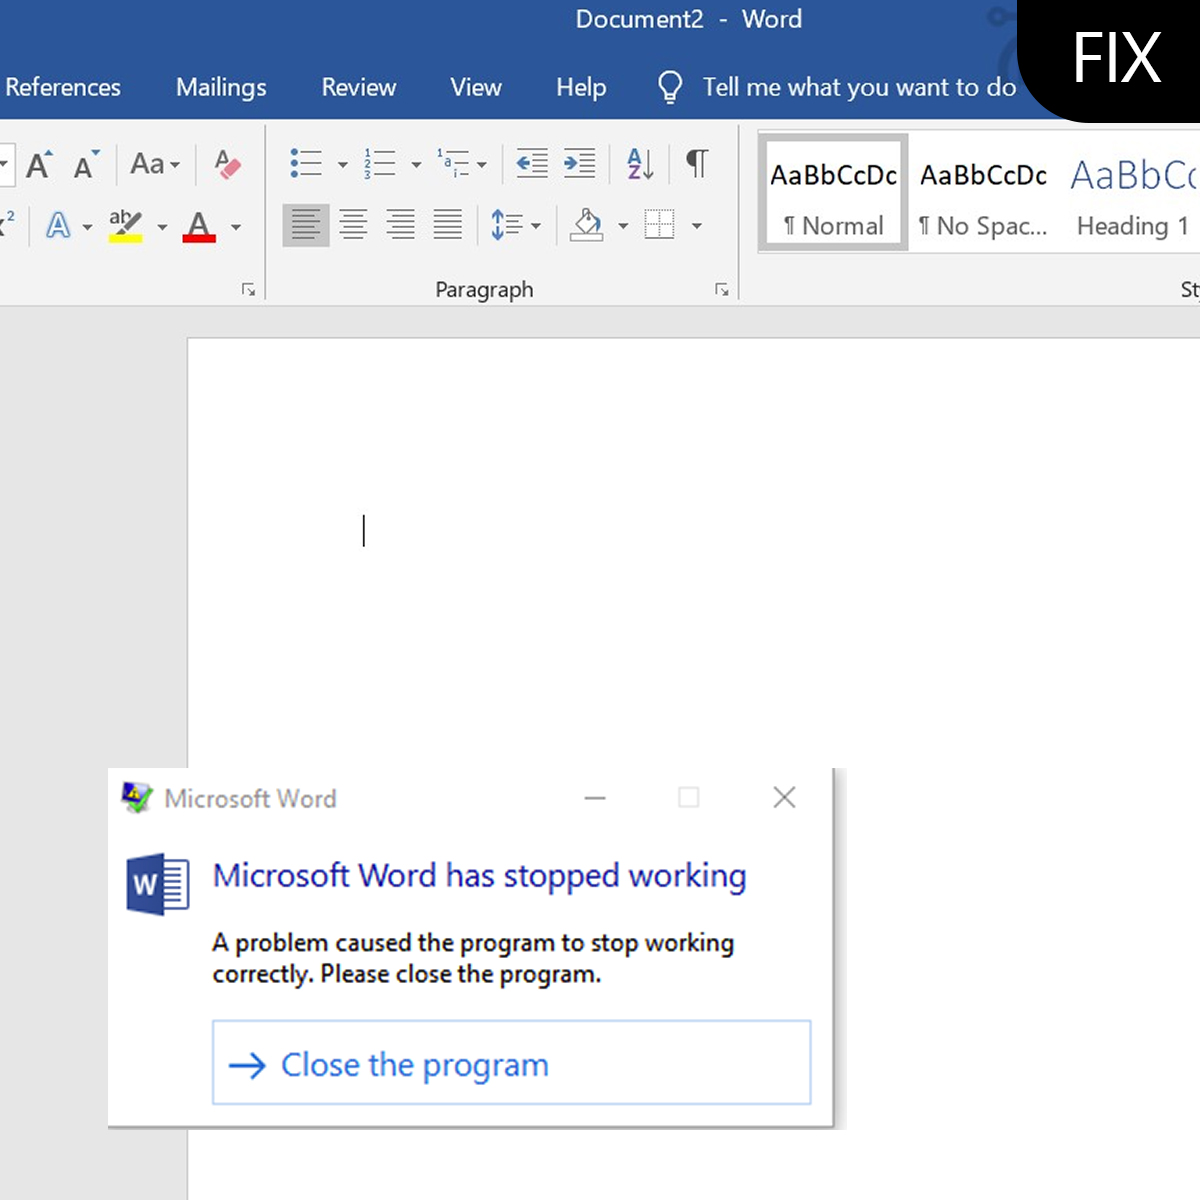 microsoft word is not working propelly